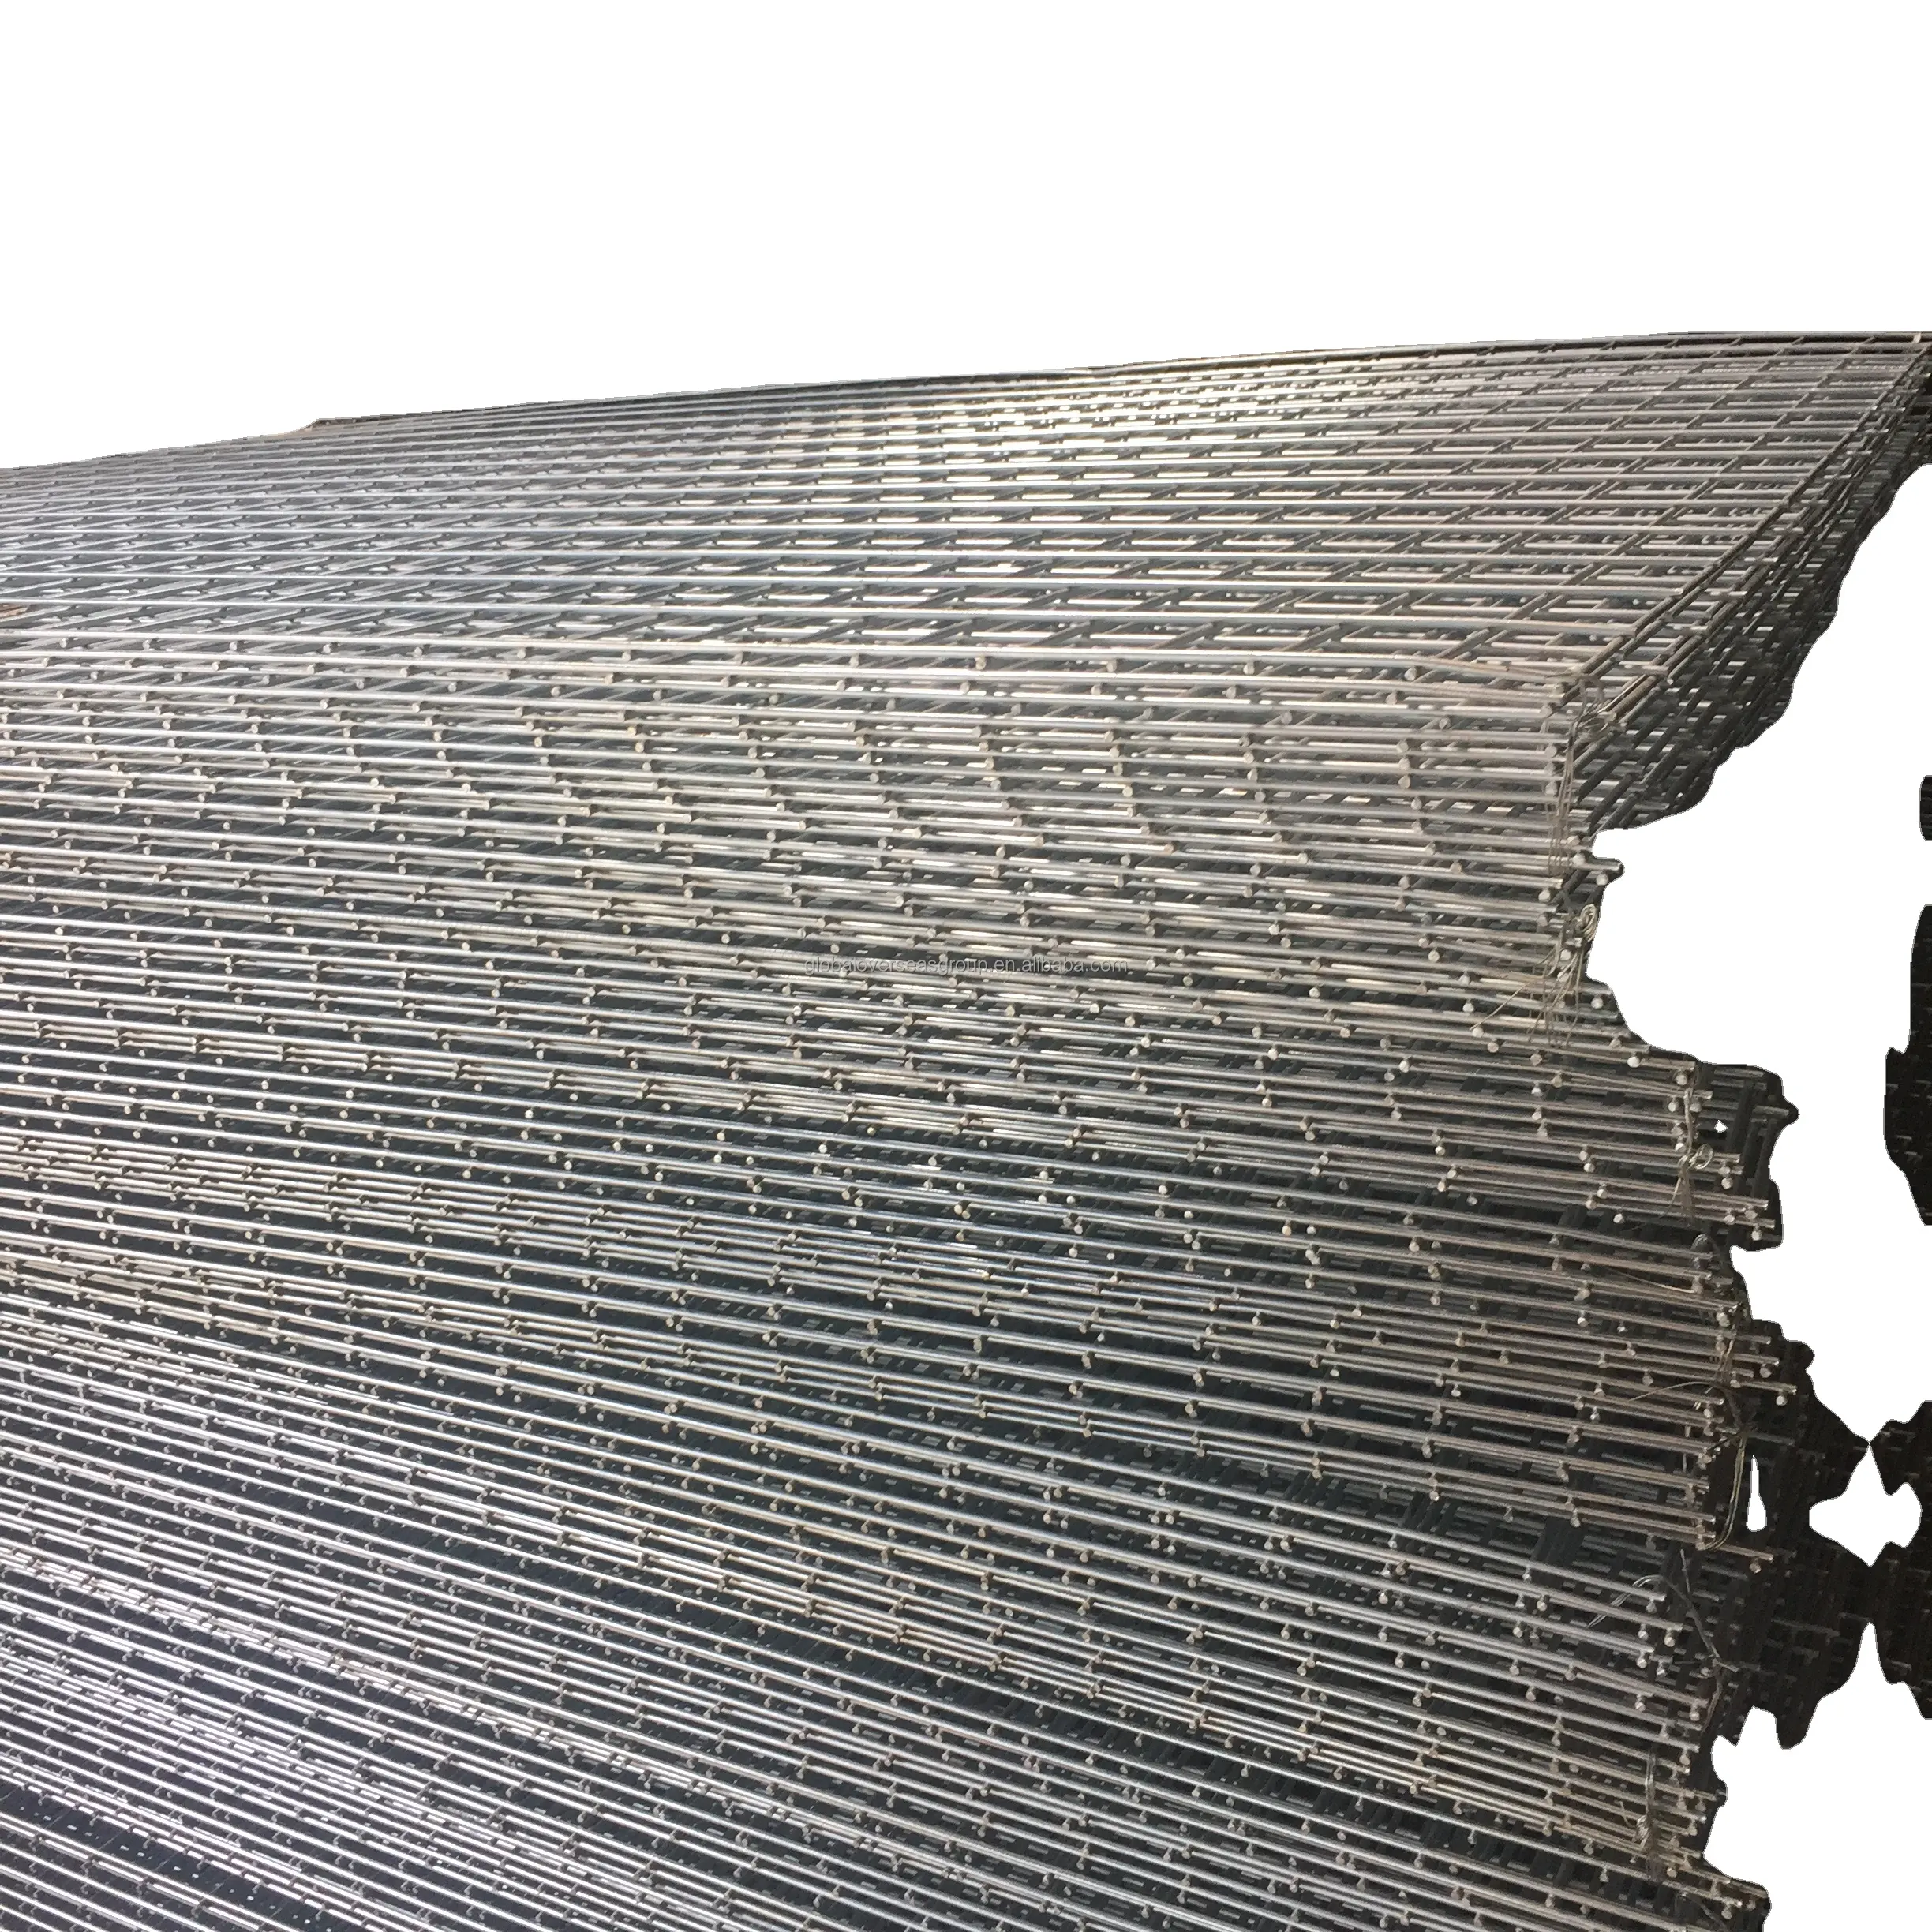 Chinese supplier High Carbon Steel Crimped Anti Clogging Self Cleaning Screen wire Mesh For Mine Sieving